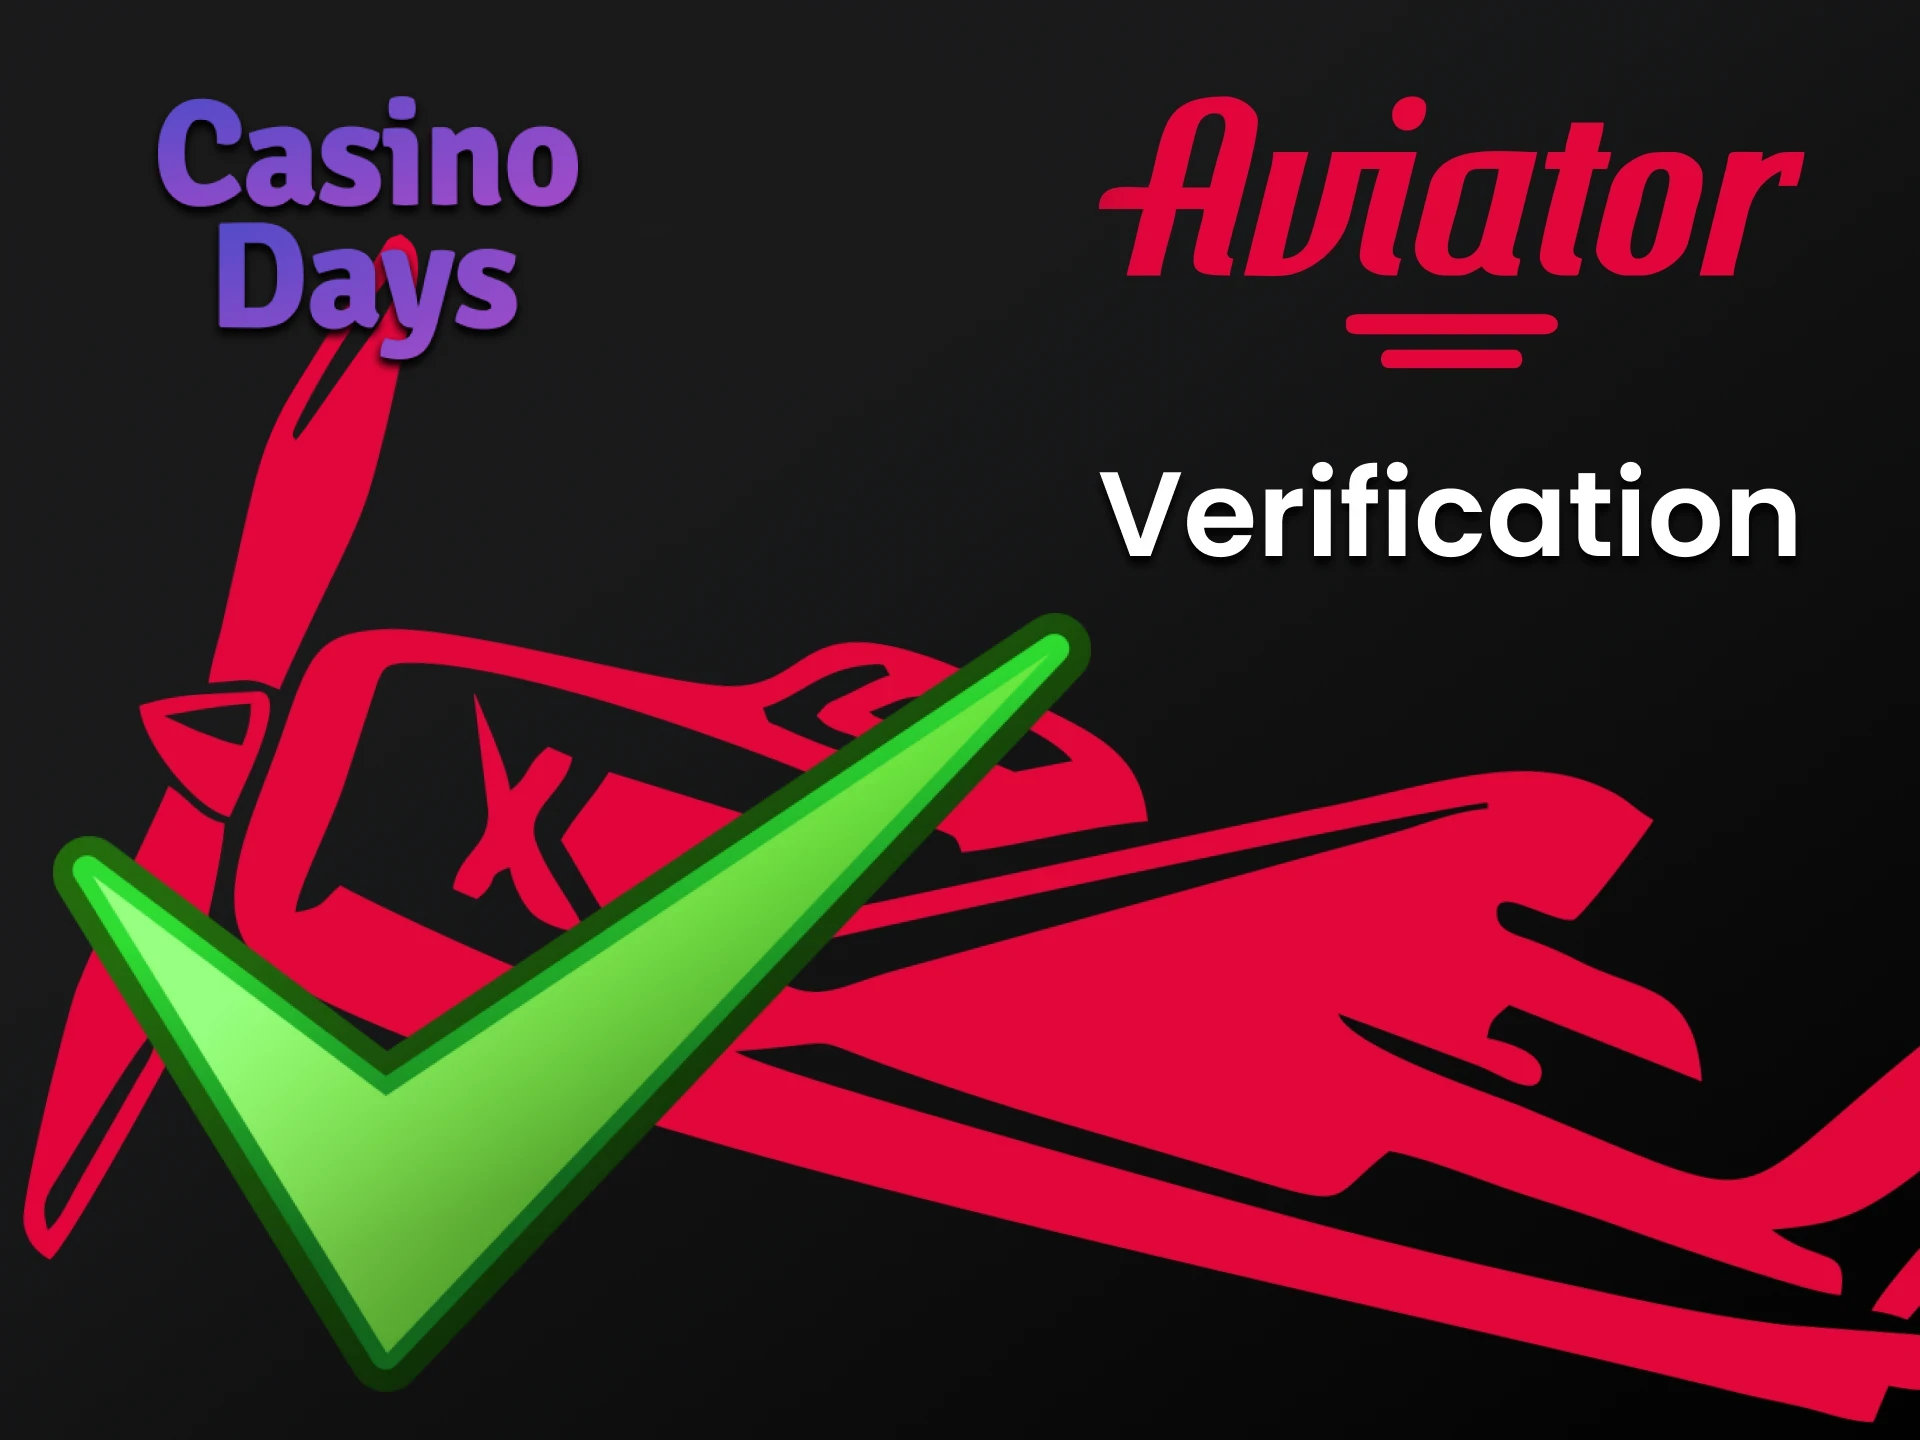 Fill out all the information for the Casino Days website to play Aviator.